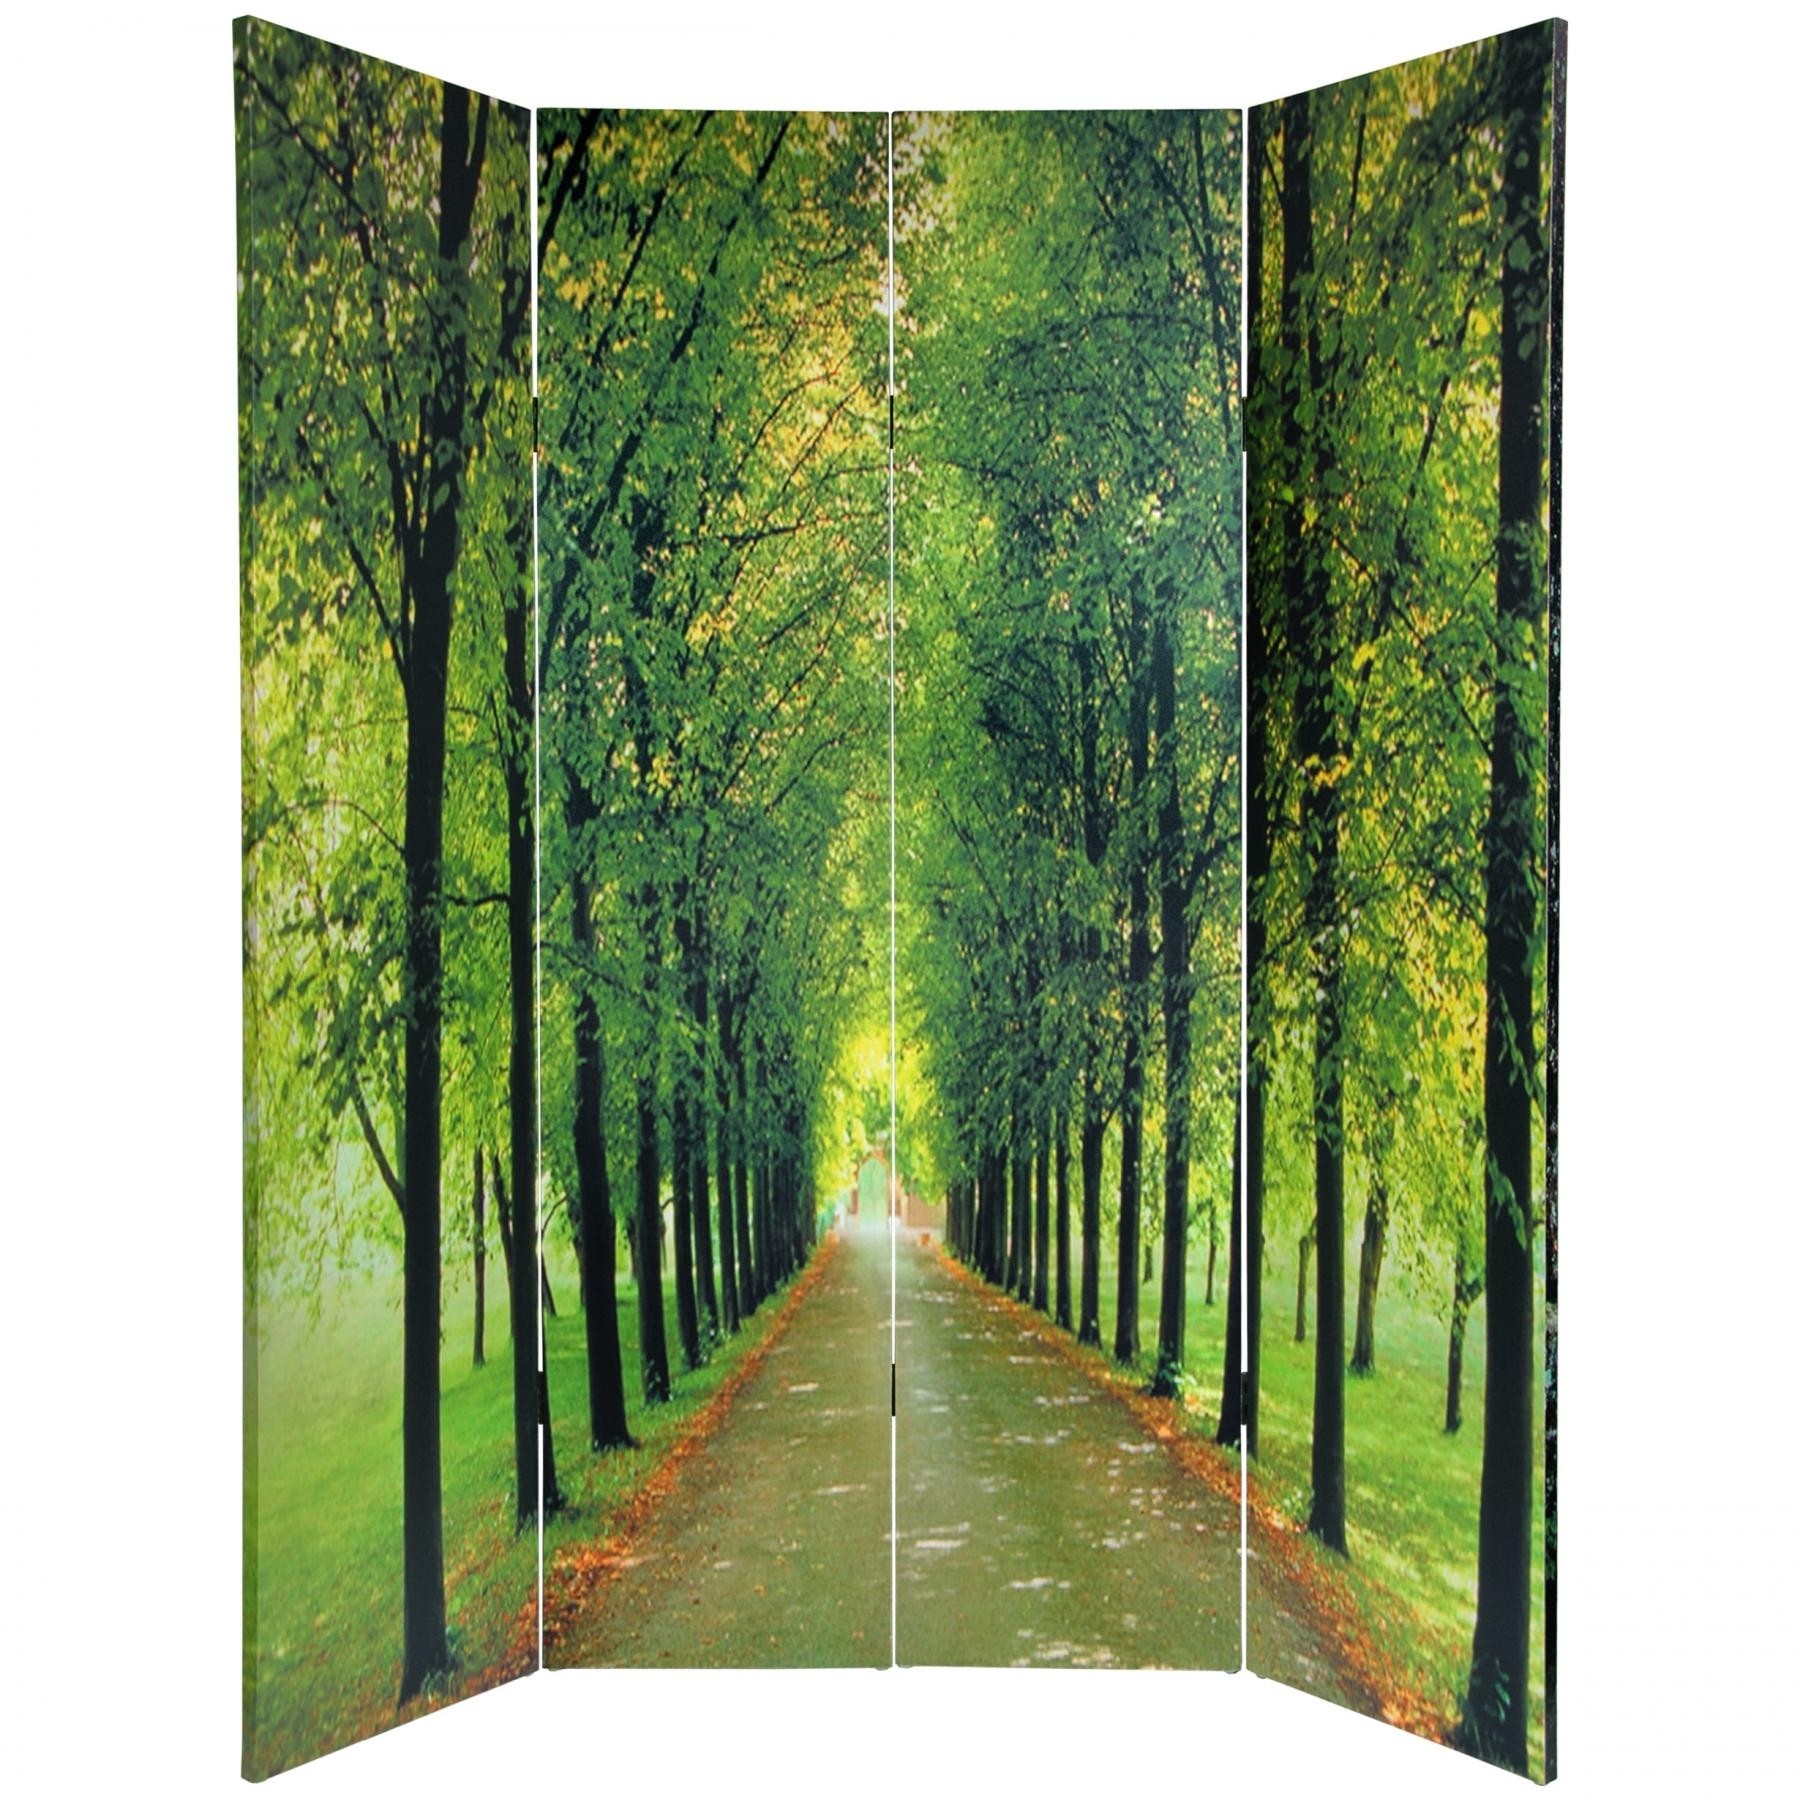 Oriental Furniture Bubbling Brook Picture, 6-Feet Path of Life Nature Photography Room Divider, 4 Panels